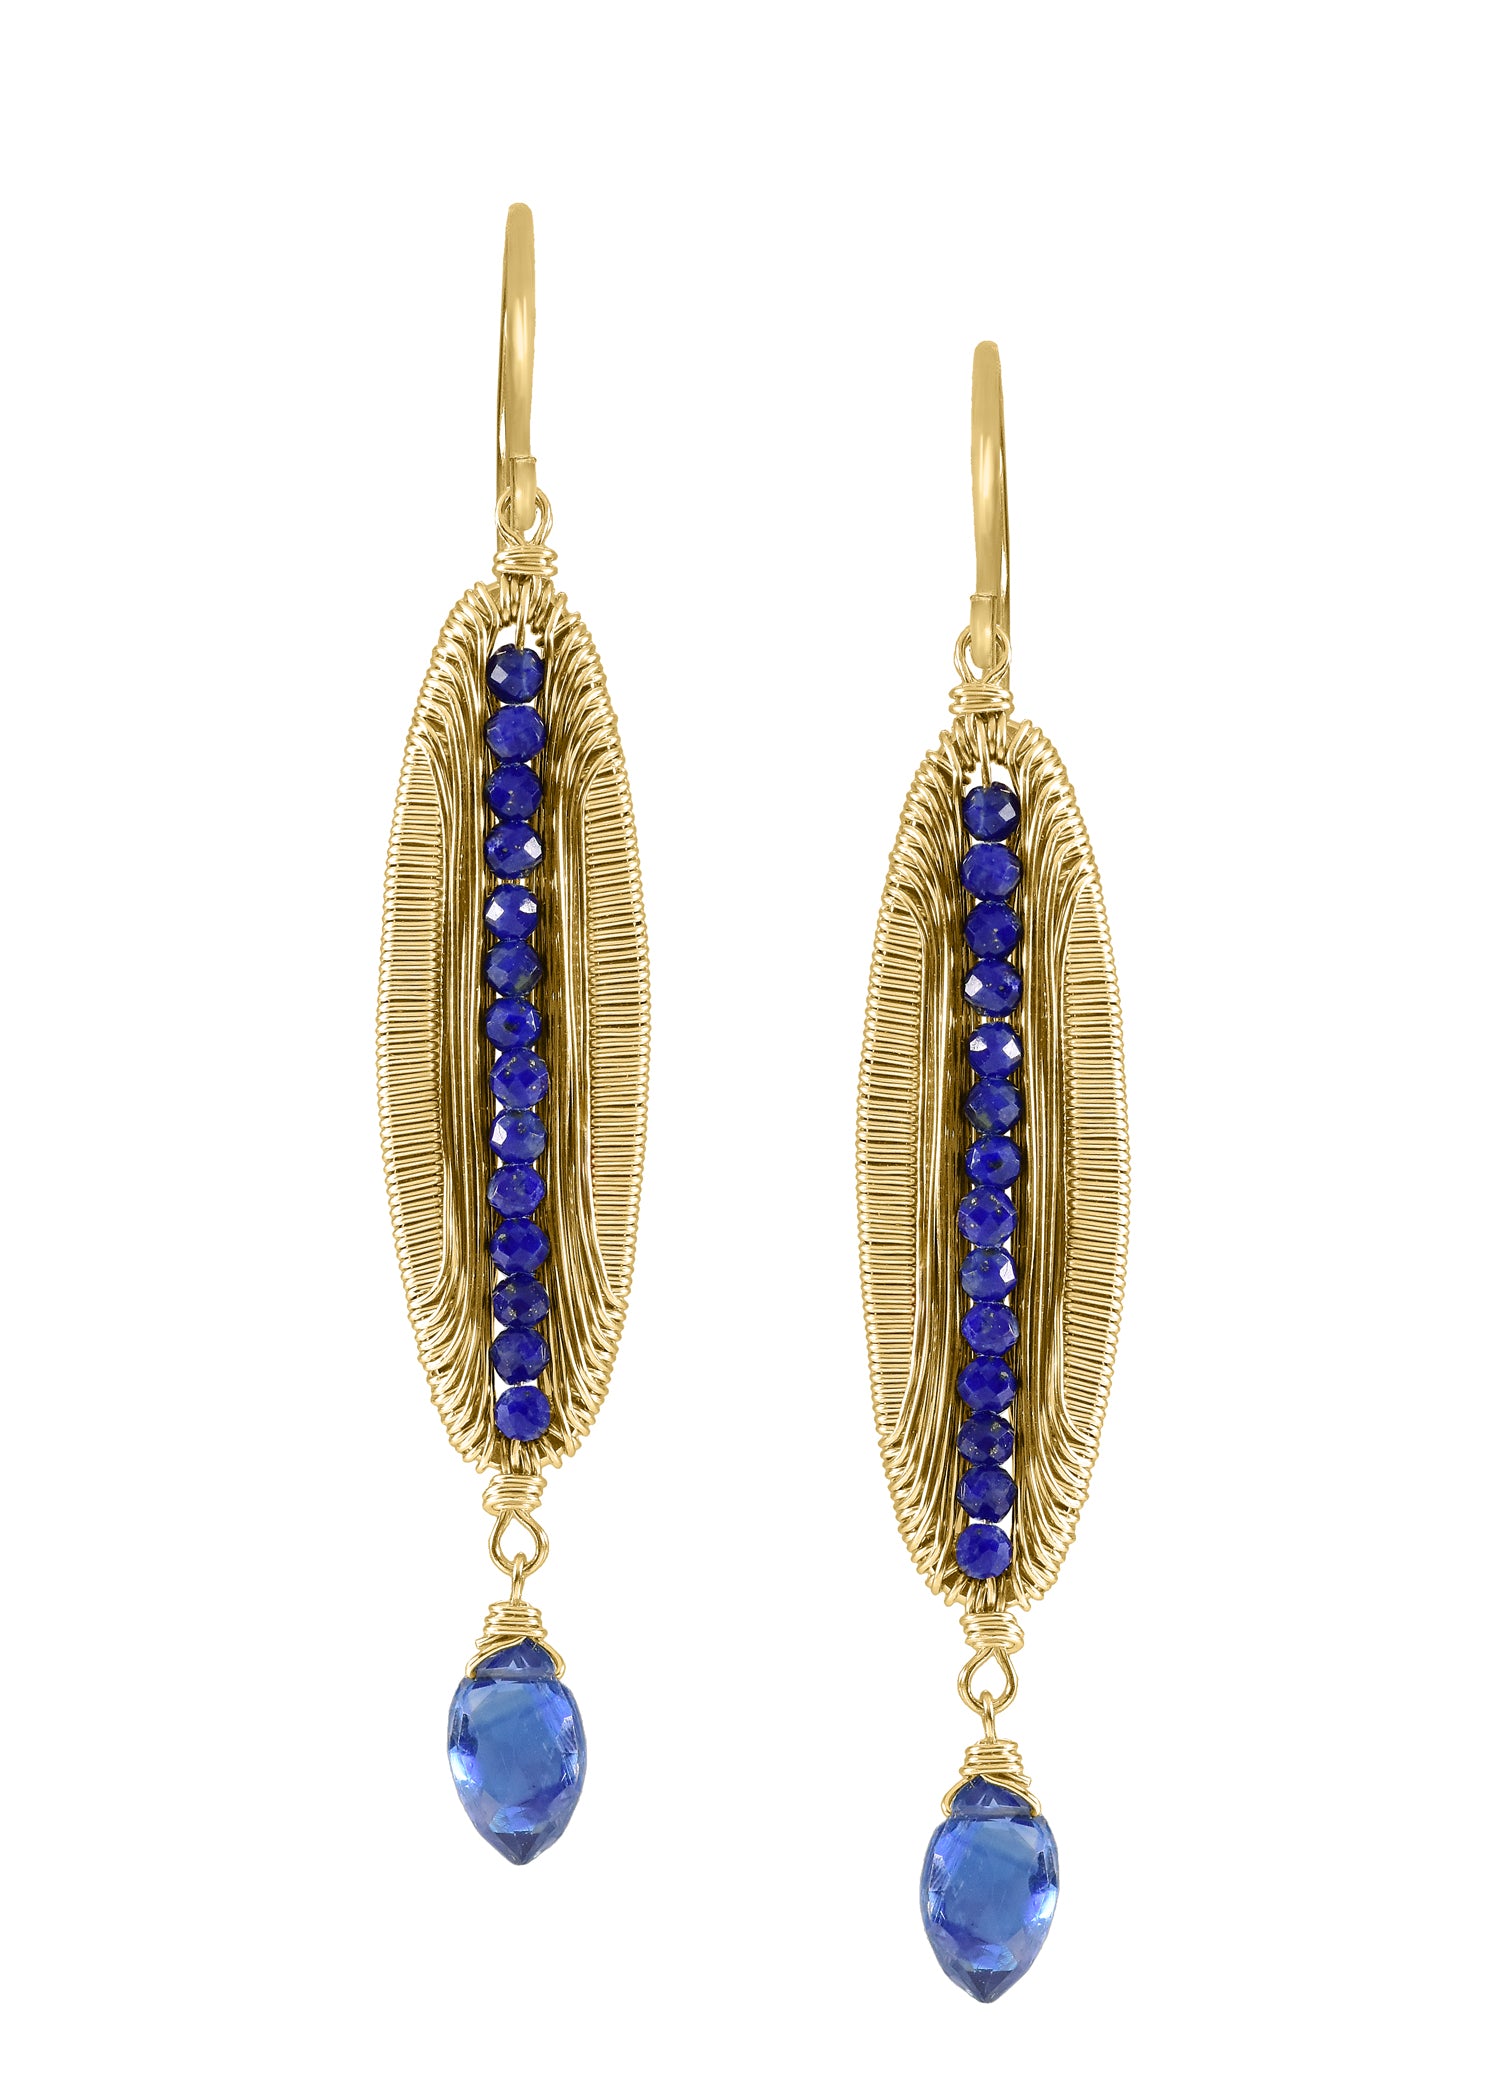 Blue lapis Kyanite 14k gold fill Earrings measure 2" in length (including the ear wires) and 5/16" in width at the widest point Handmade in our Los Angeles studio